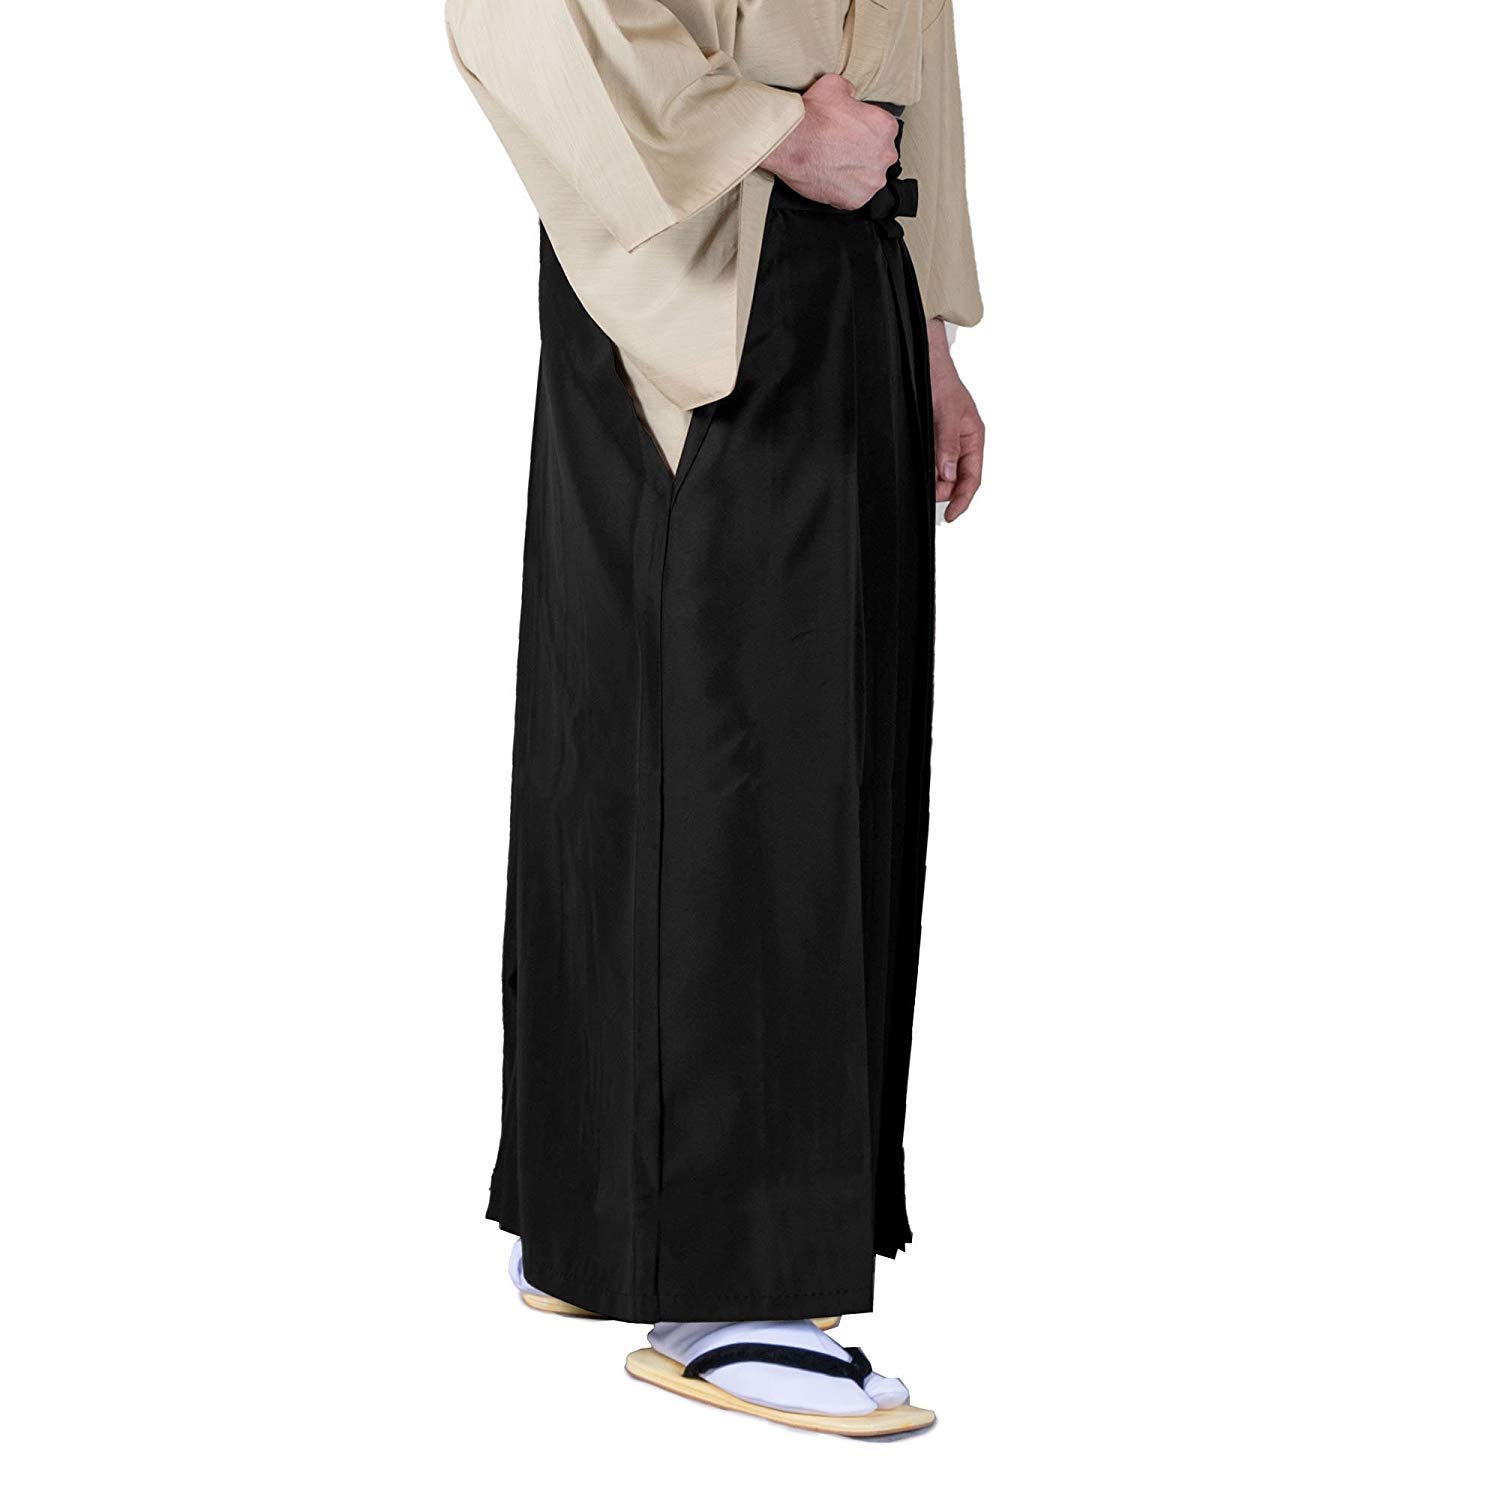 All about Hakama – a fashion and martial arts item with deep meaning |  Buyee Blog